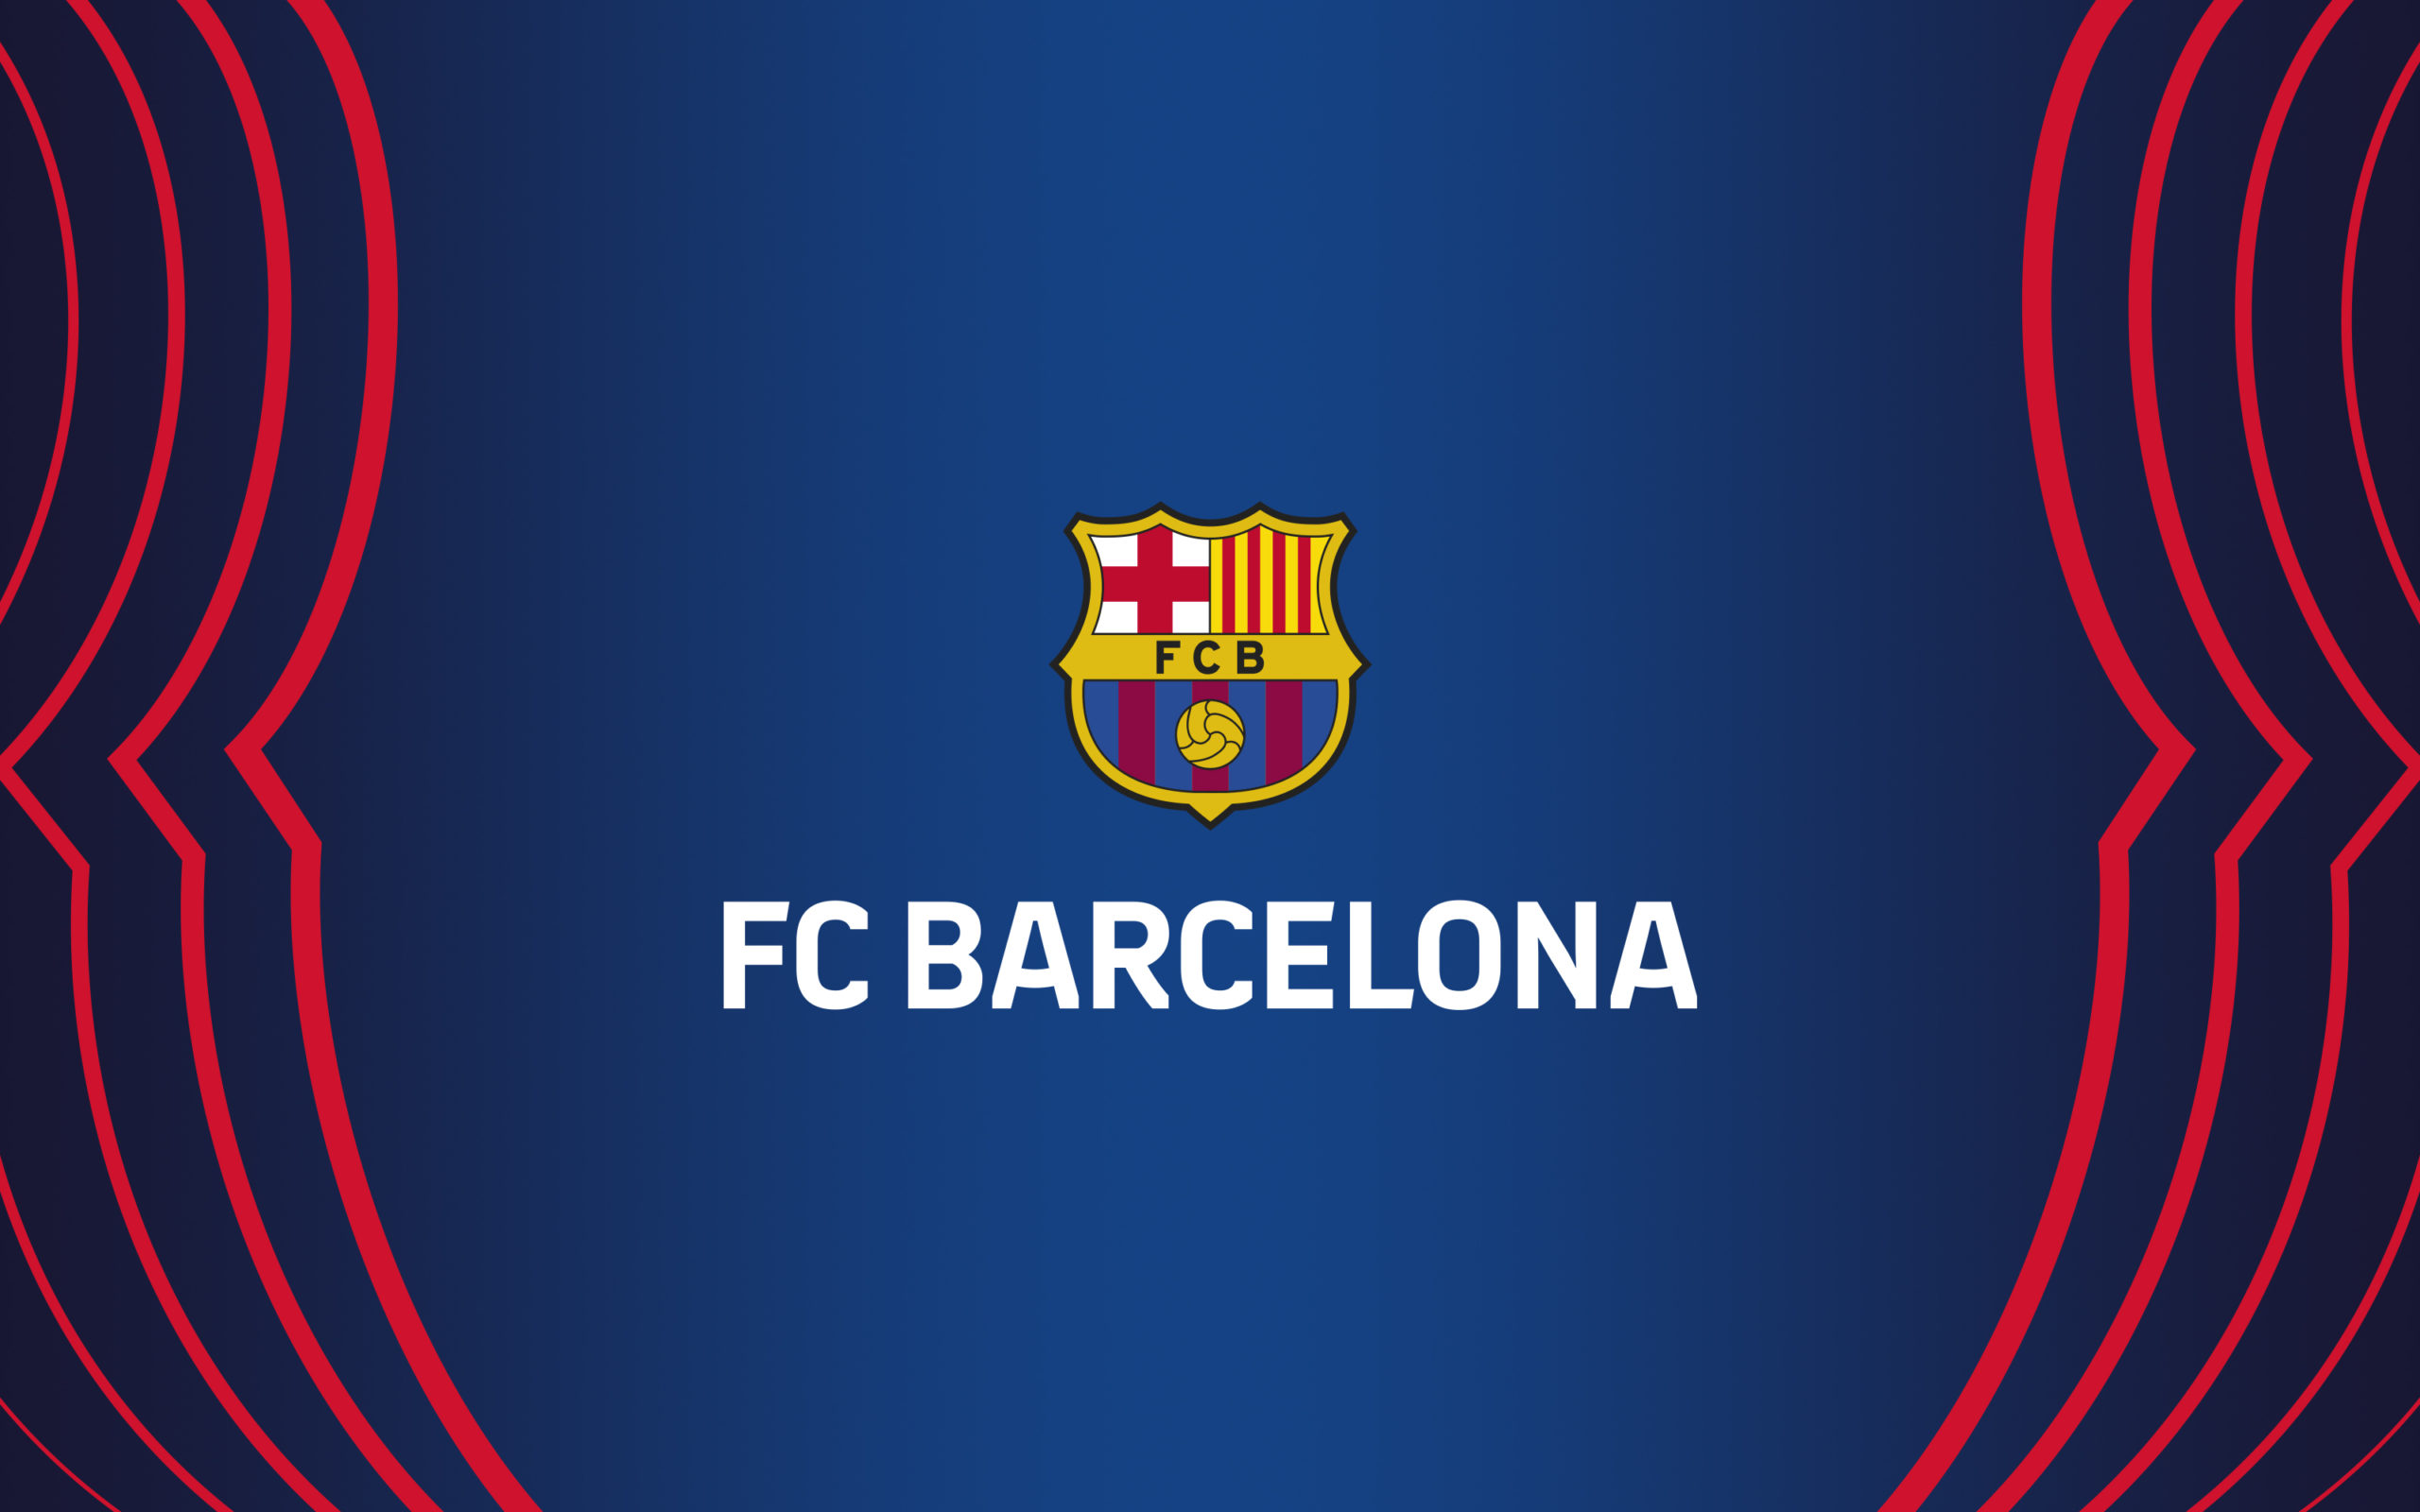 FFE727C0 1F93 4449 A3EE 8116EB3727B3 scaled - FC Barcelona must make better signings and focus on youngsters  